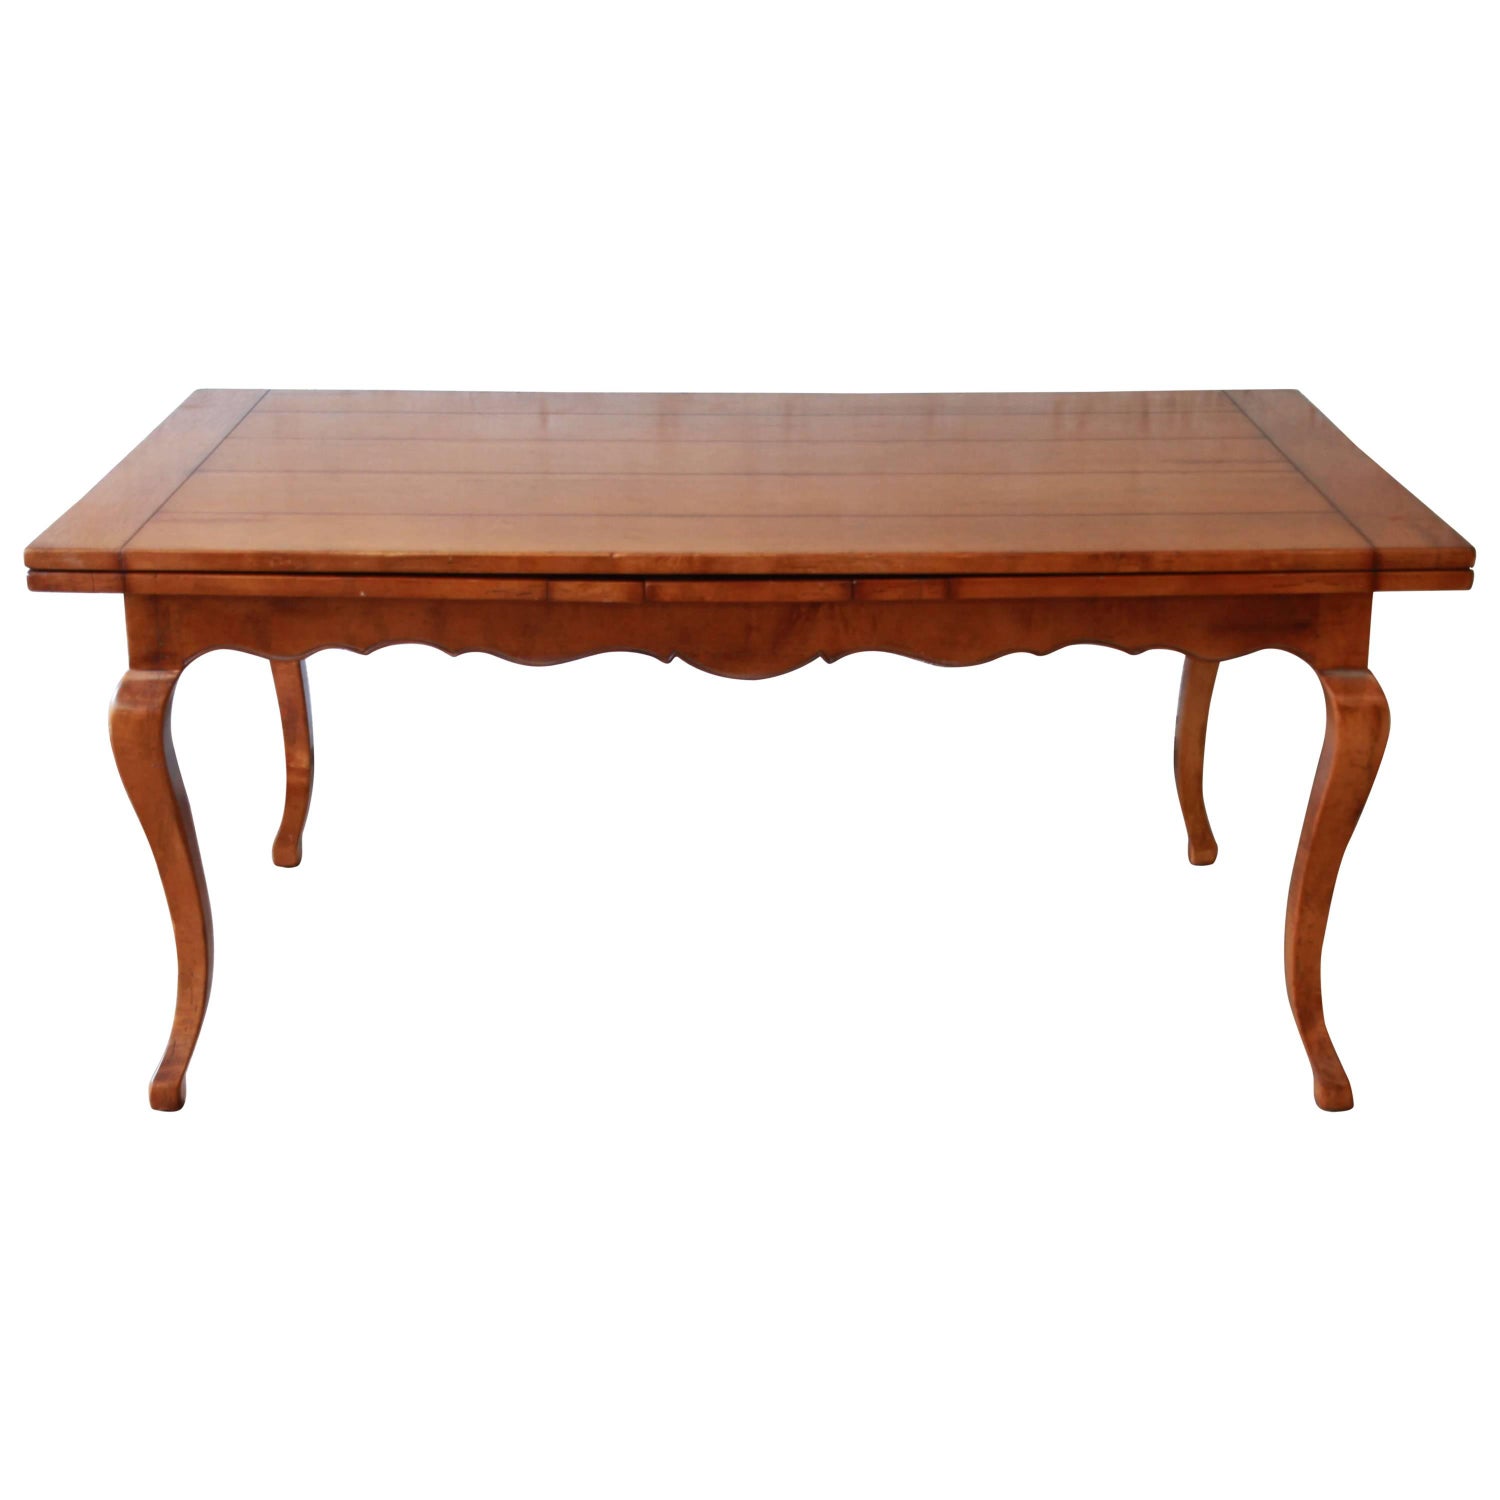 Baker Furniture Company Dining Room Tables - 19 For Sale at 1stdibs